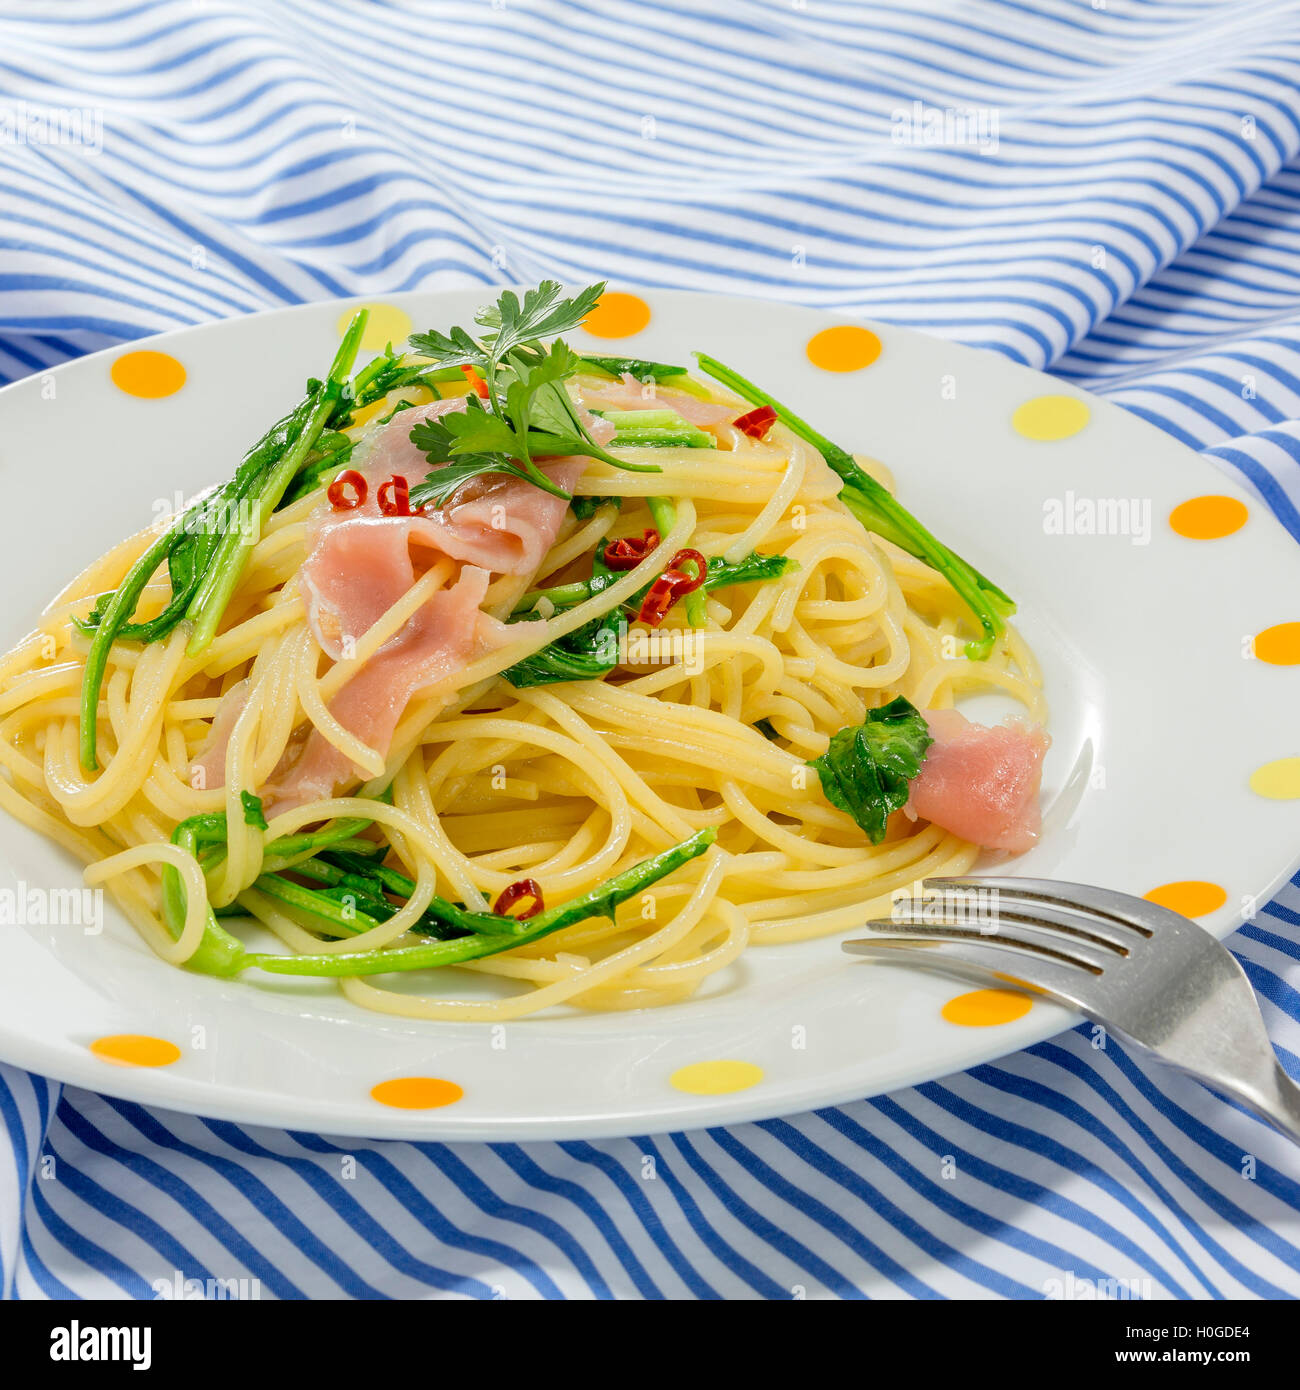 Pasta noodle with sauteed pork and vegetables on the tablecloth Stock Photo